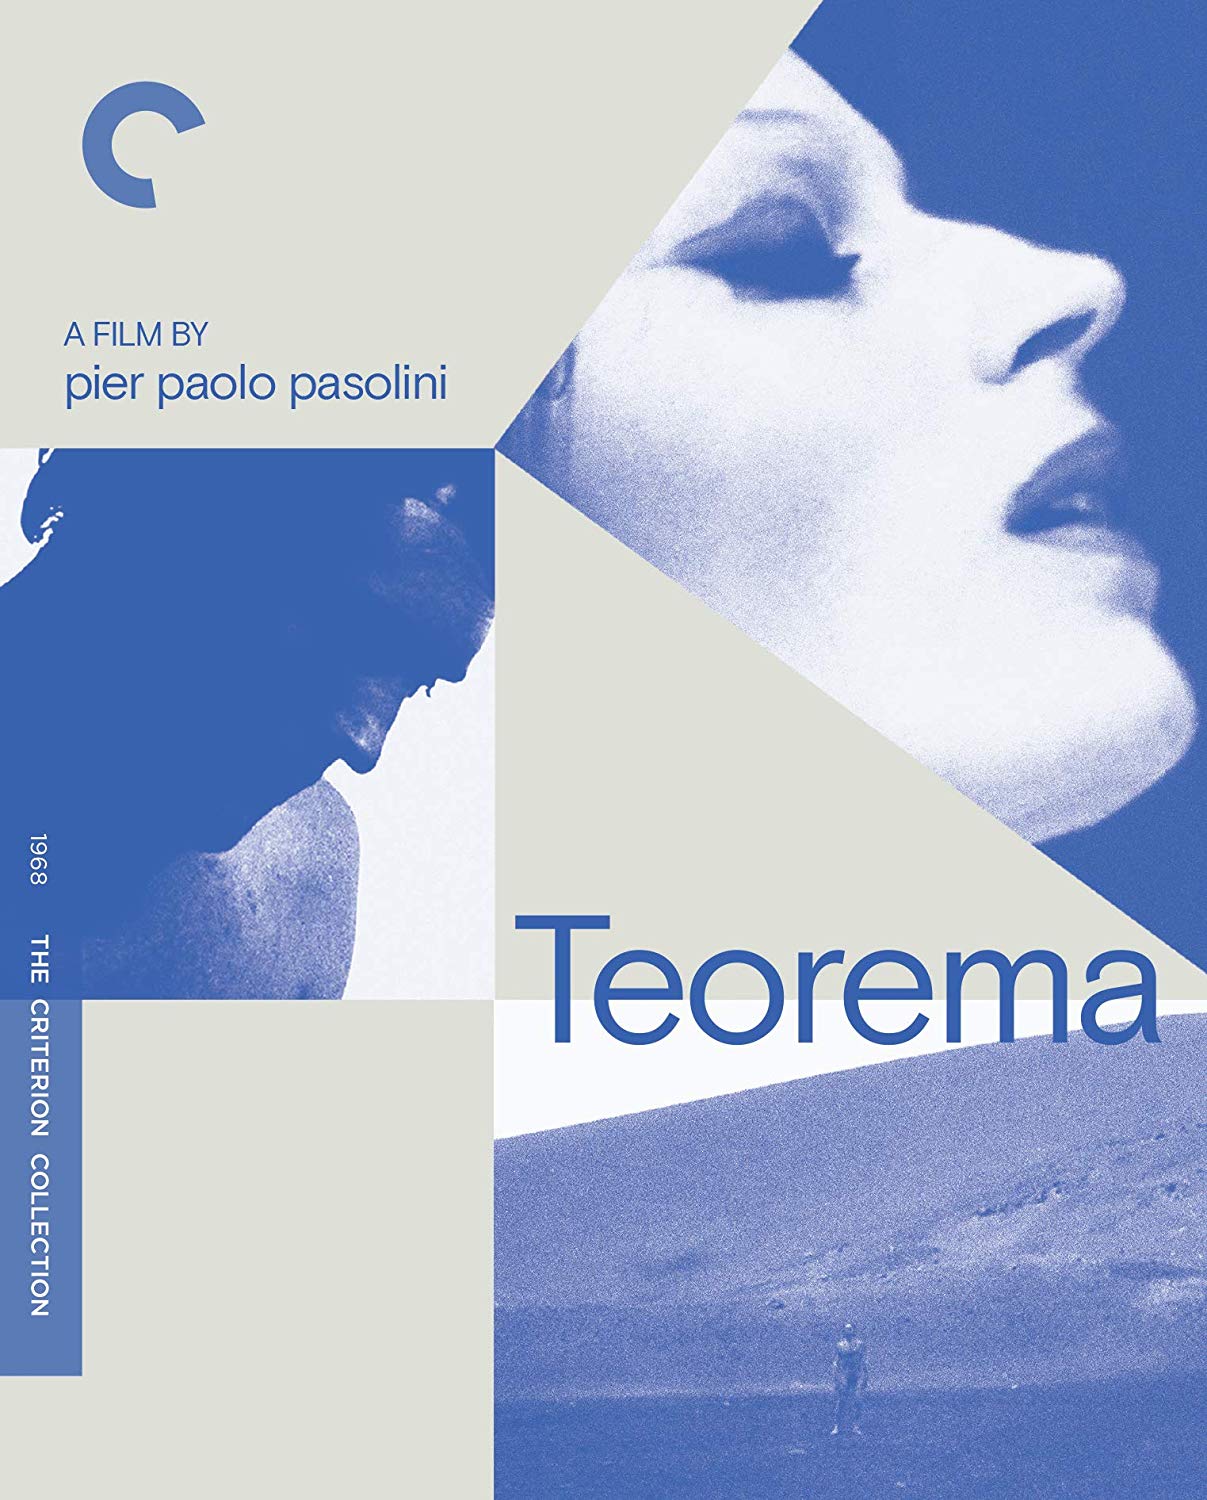 Teorema [Criterion Collection] [Blu-ray] cover art